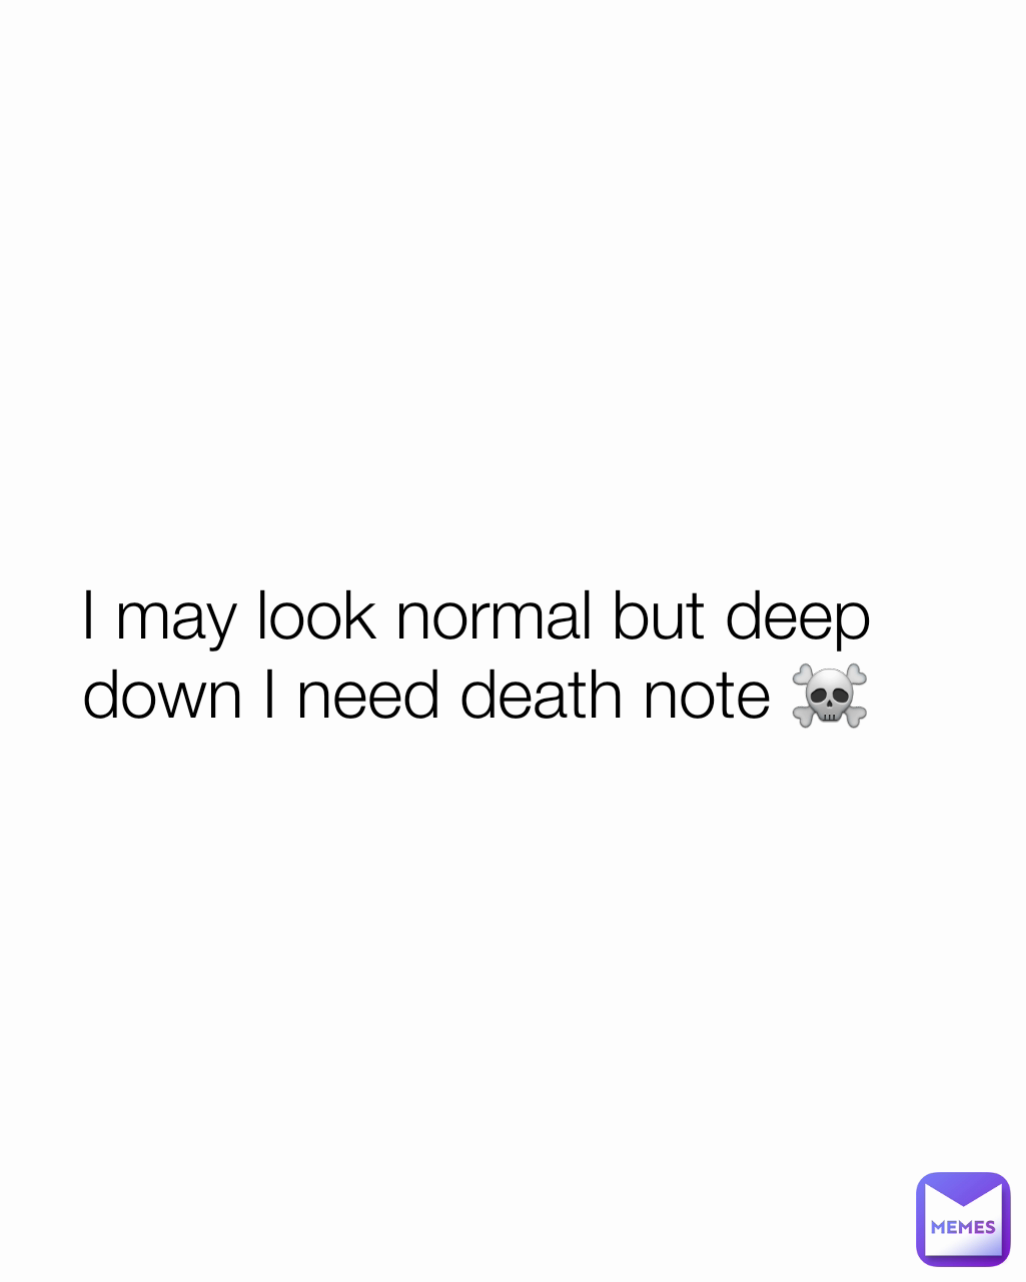 I may look normal but deep down I need death note ☠️